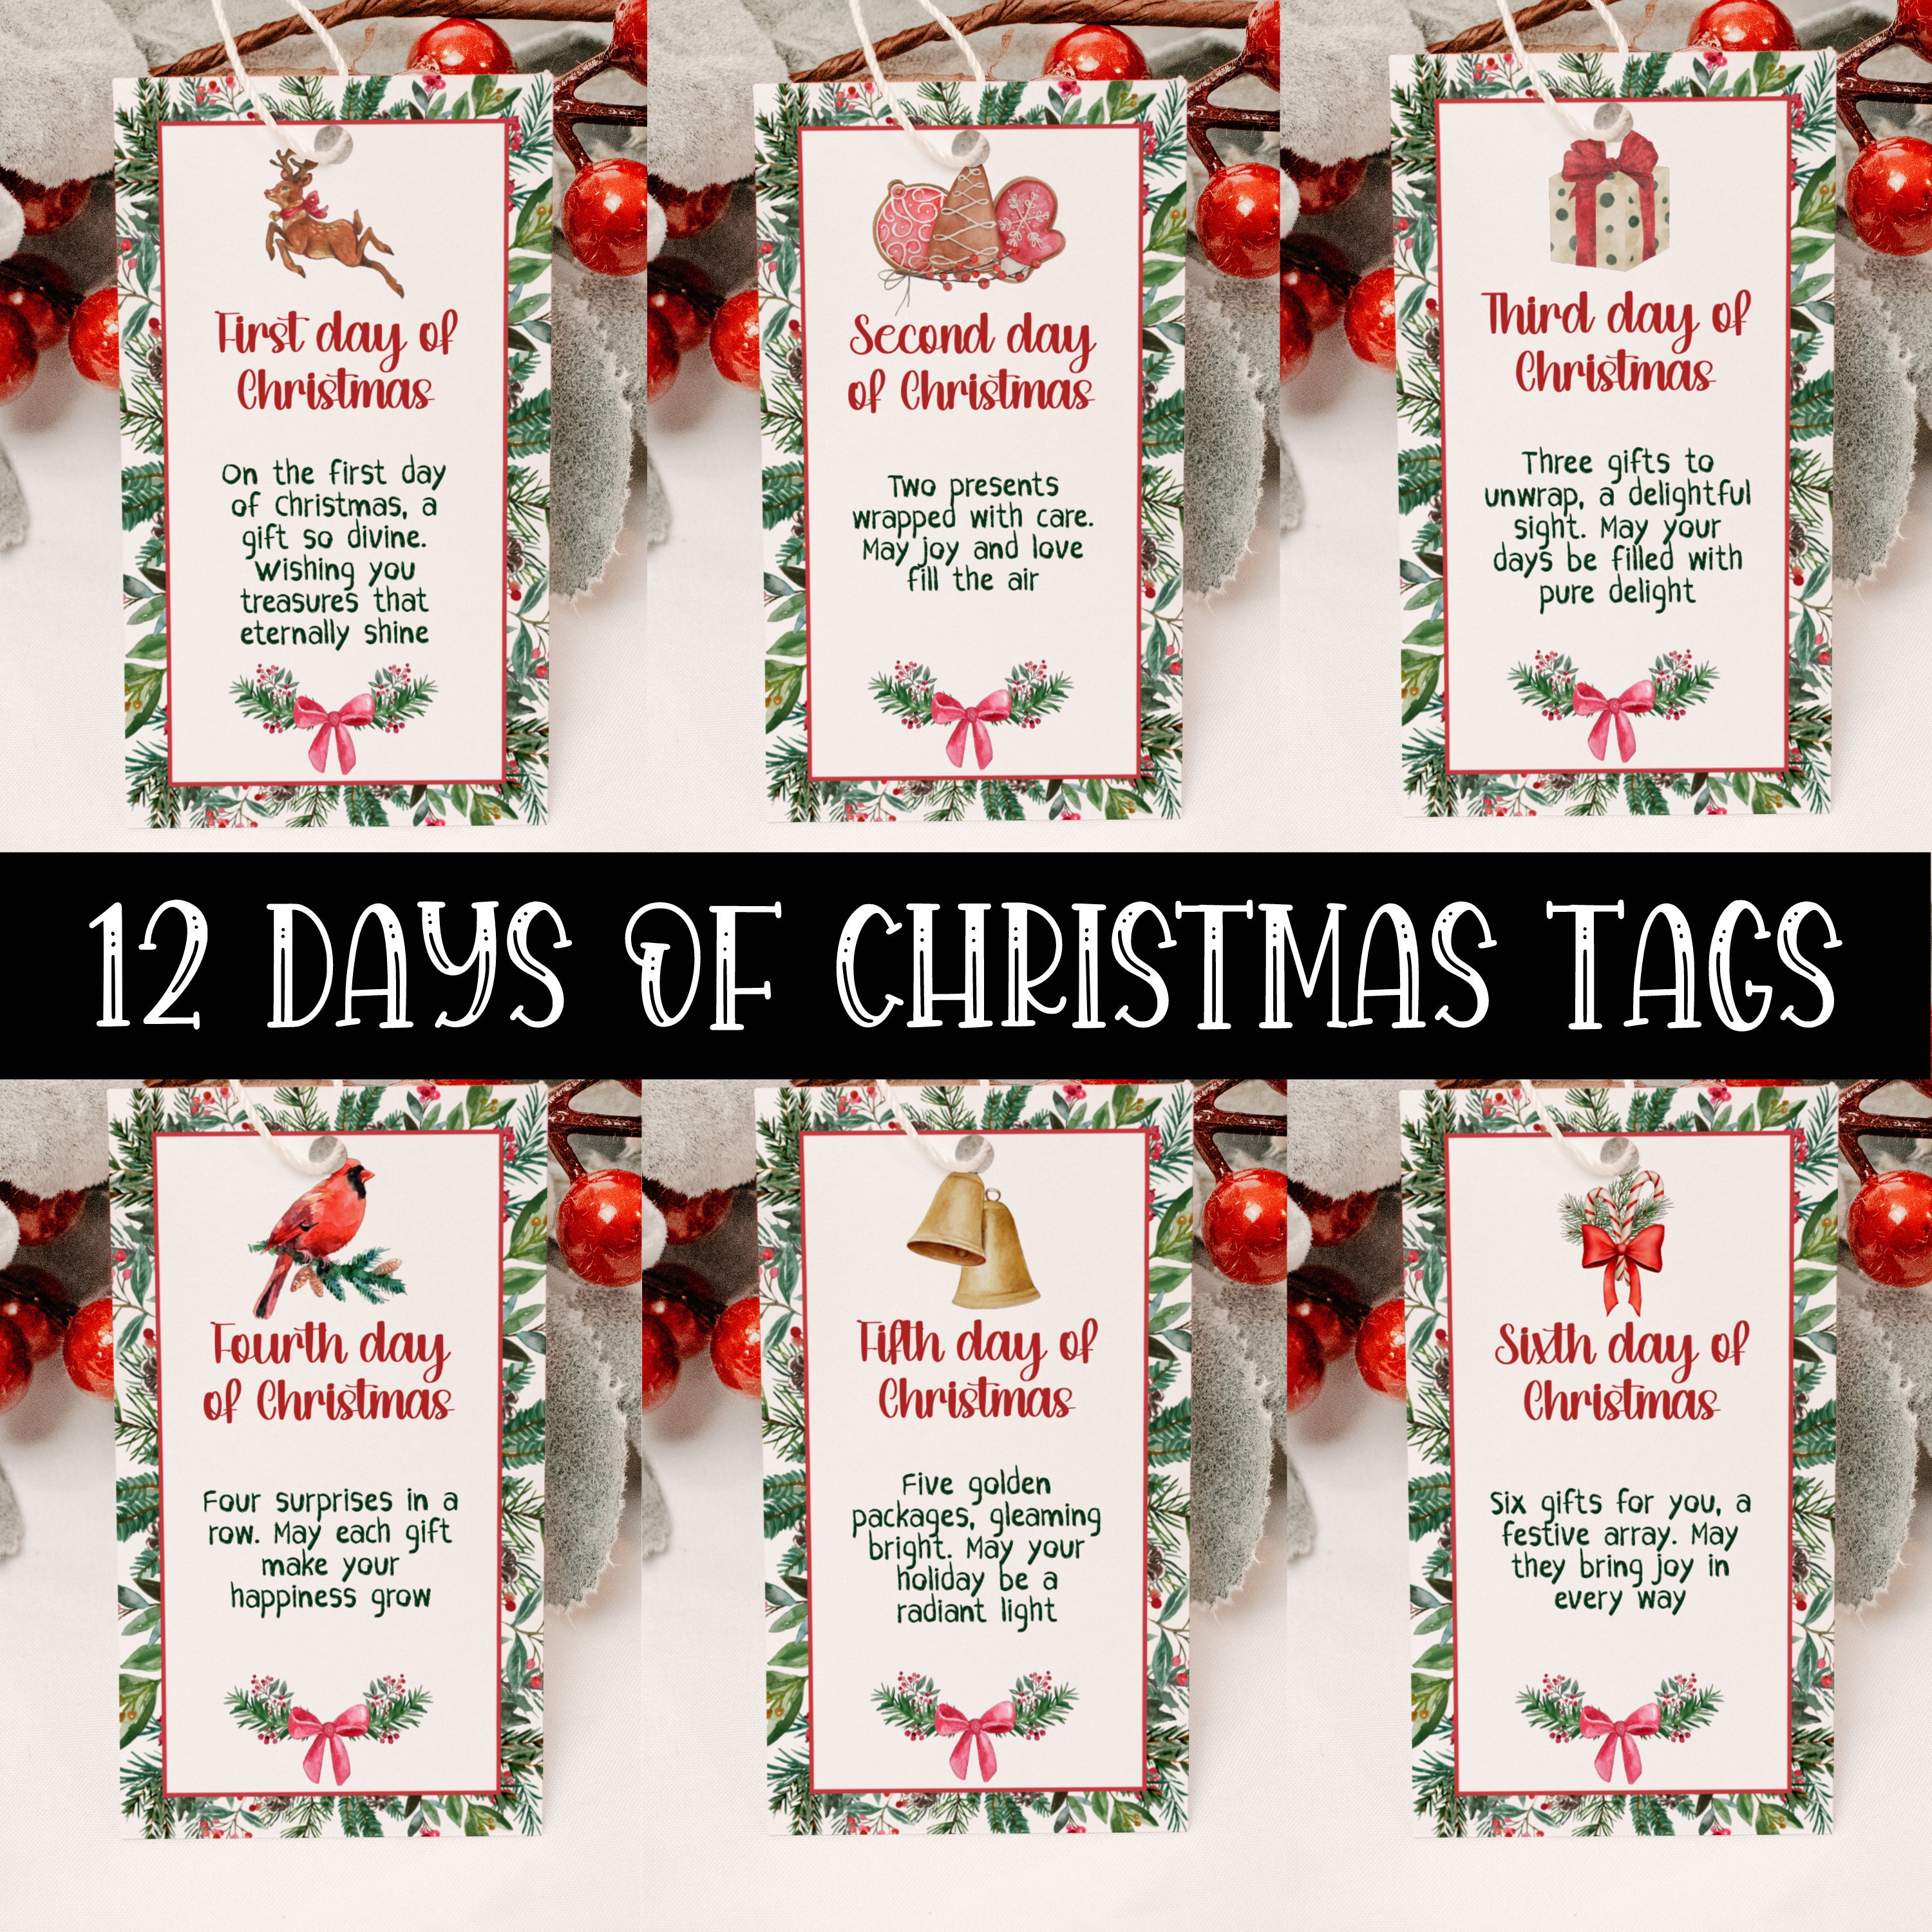 12 Days of Christmas Candle Gift Set with Funny PG-13 Labels – Sugar  Sidewalk